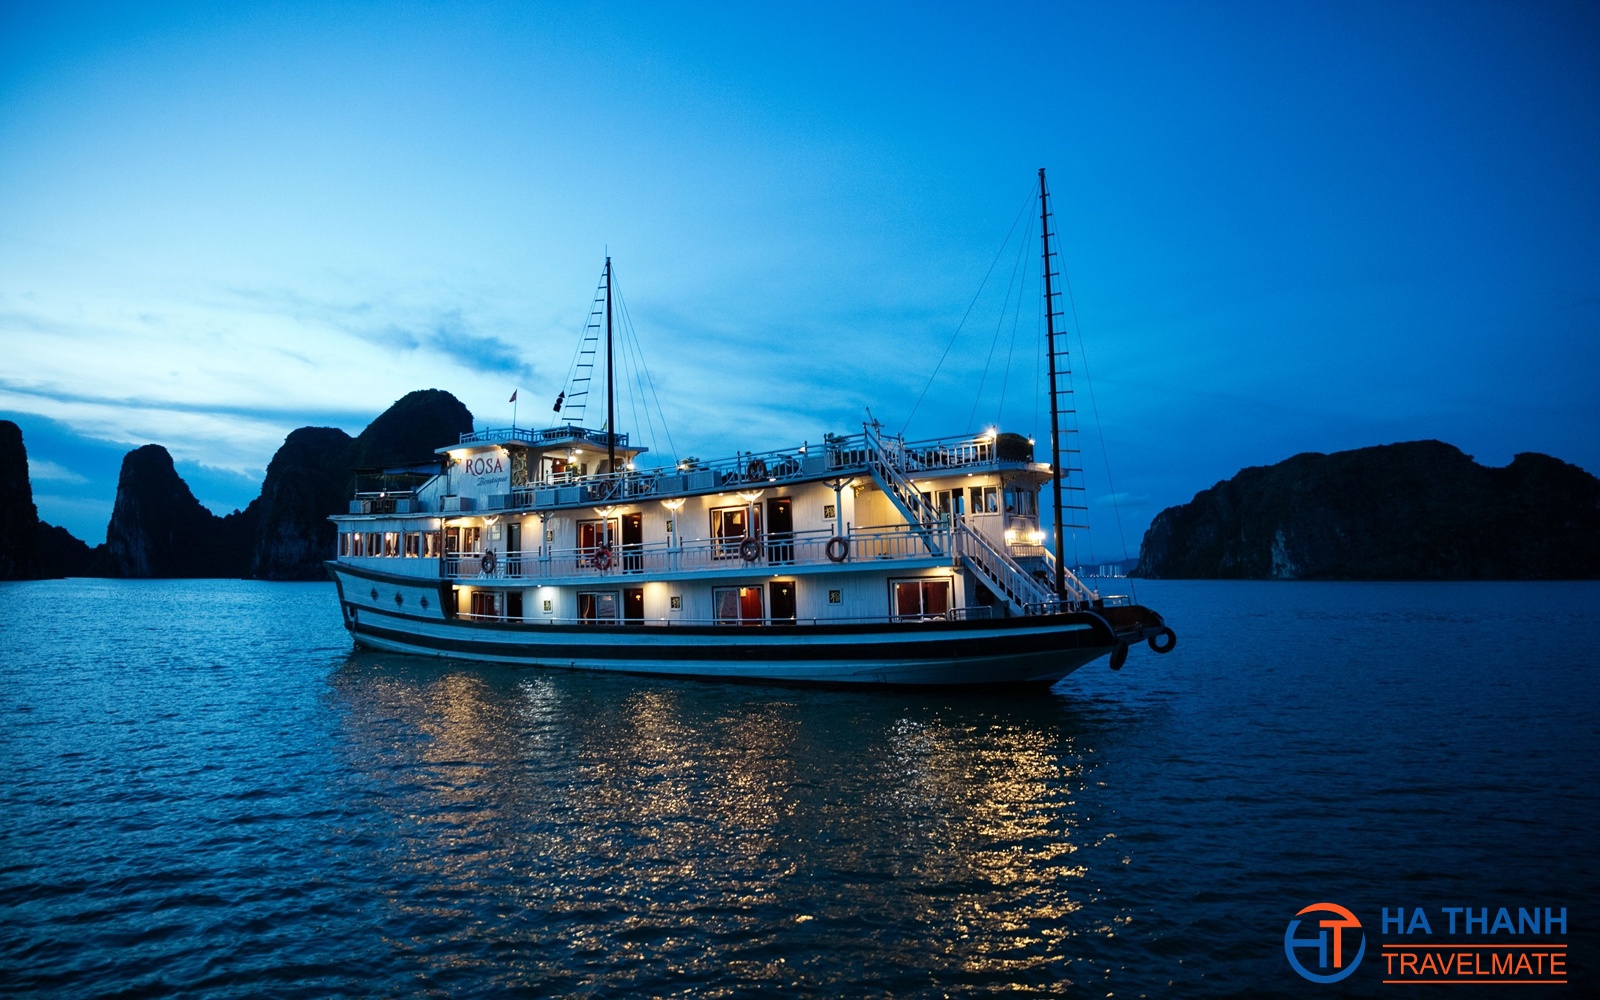 Rosa Boutique Cruise 3 days/2 nights